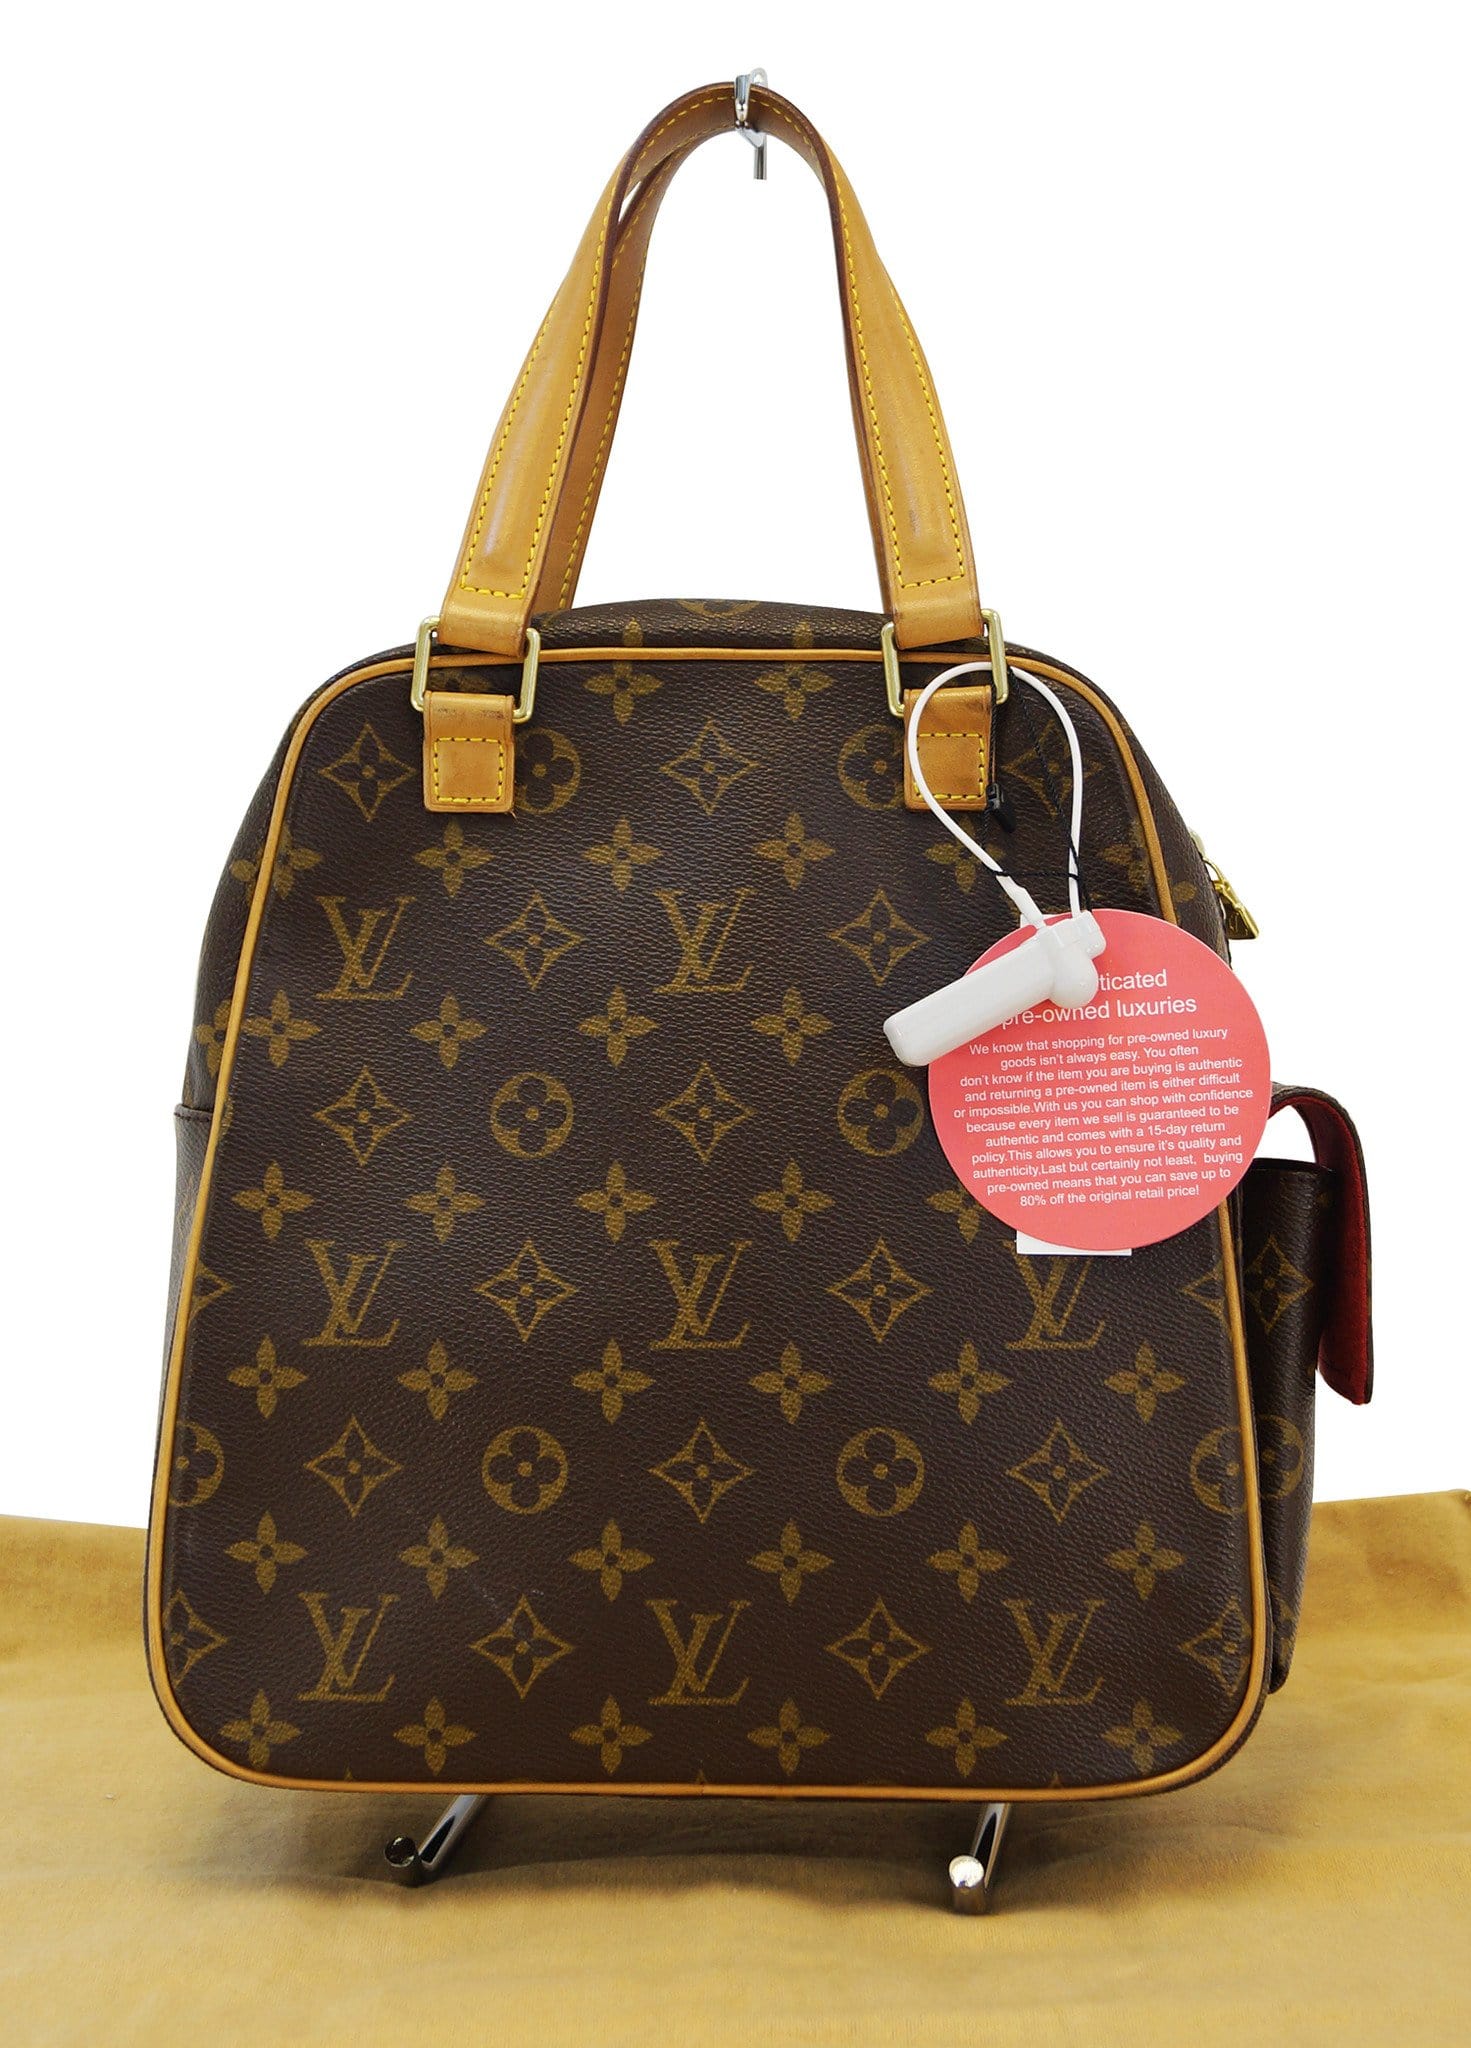 Shop for Louis Vuitton Monogram Canvas Leather Excentri Cite Shouder Bag -  Shipped from USA